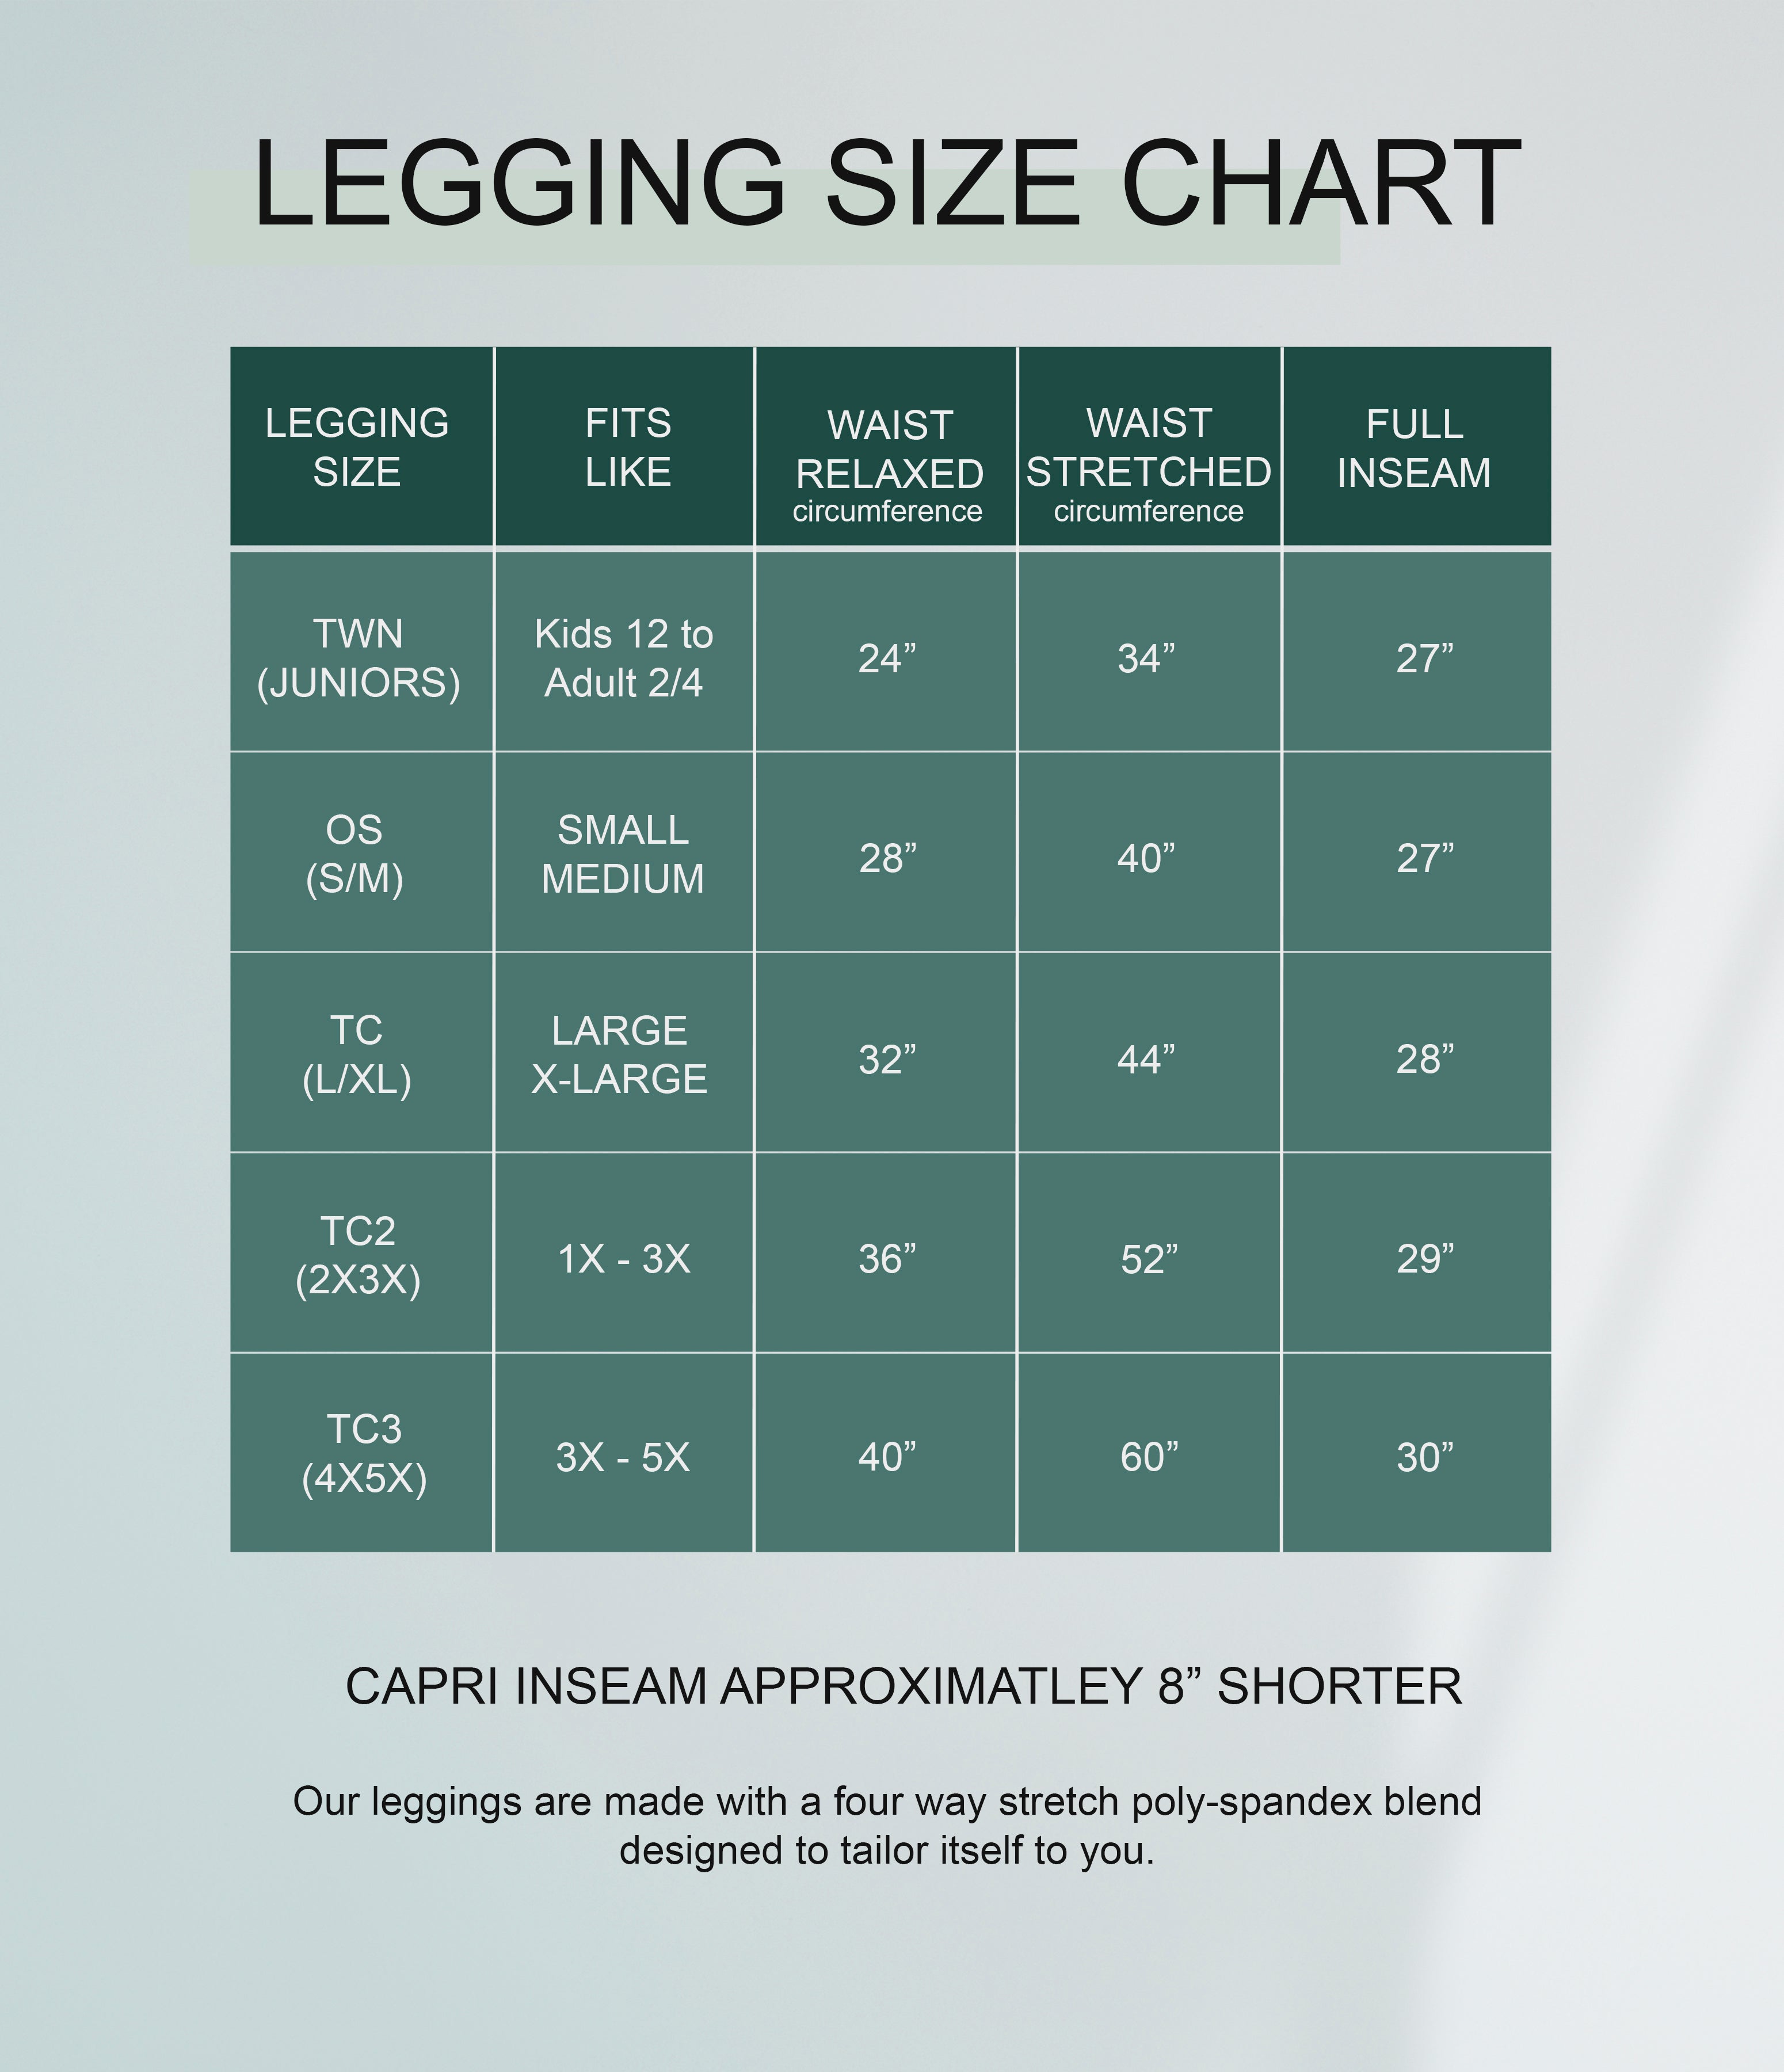 Lularoe Leggings Size Chart - Black-and-white - 838x1068 PNG Download -  PNGkit